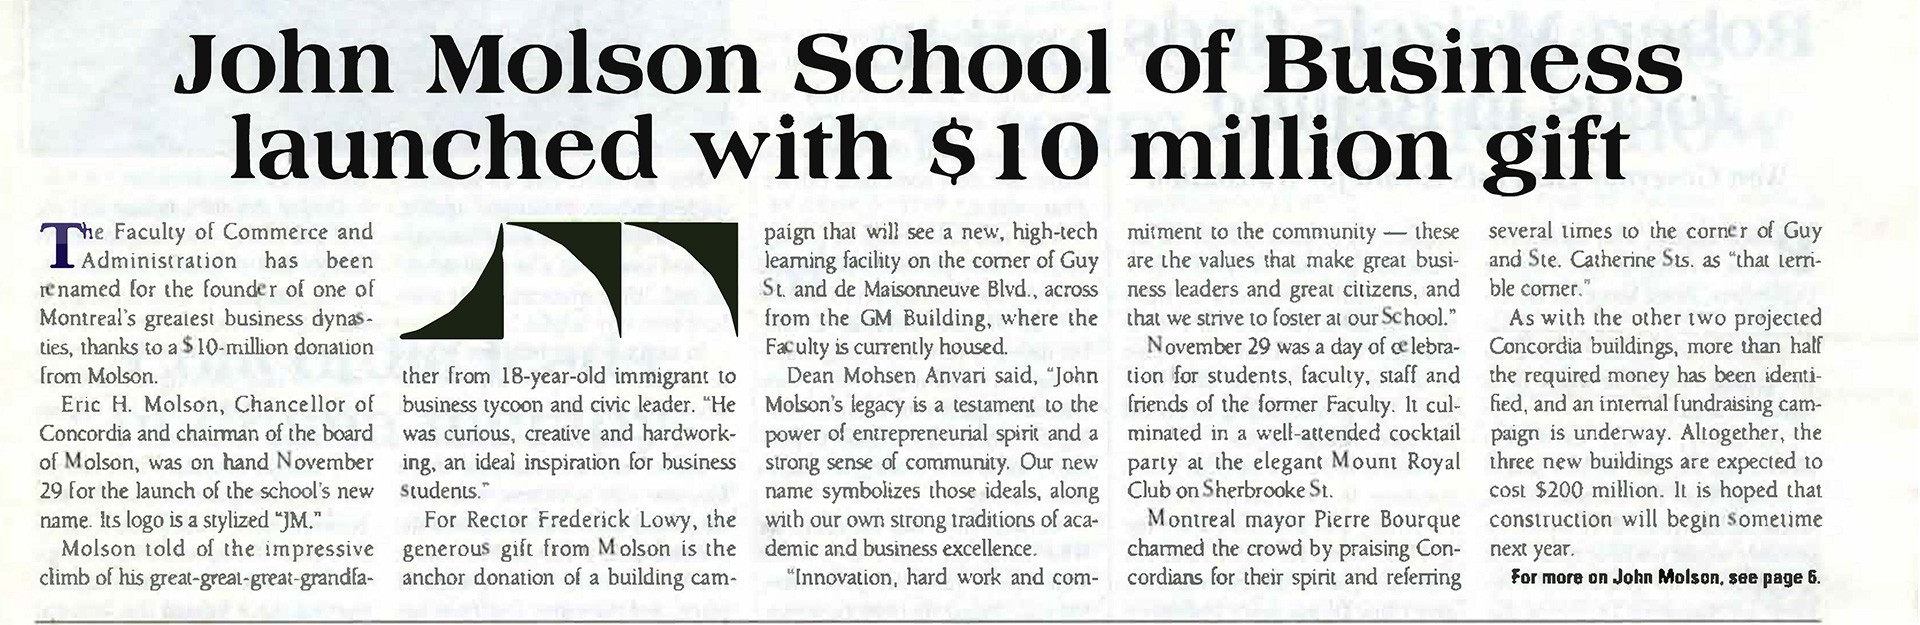 Newspaper article: John Molson School of Business launched with $10 million gift